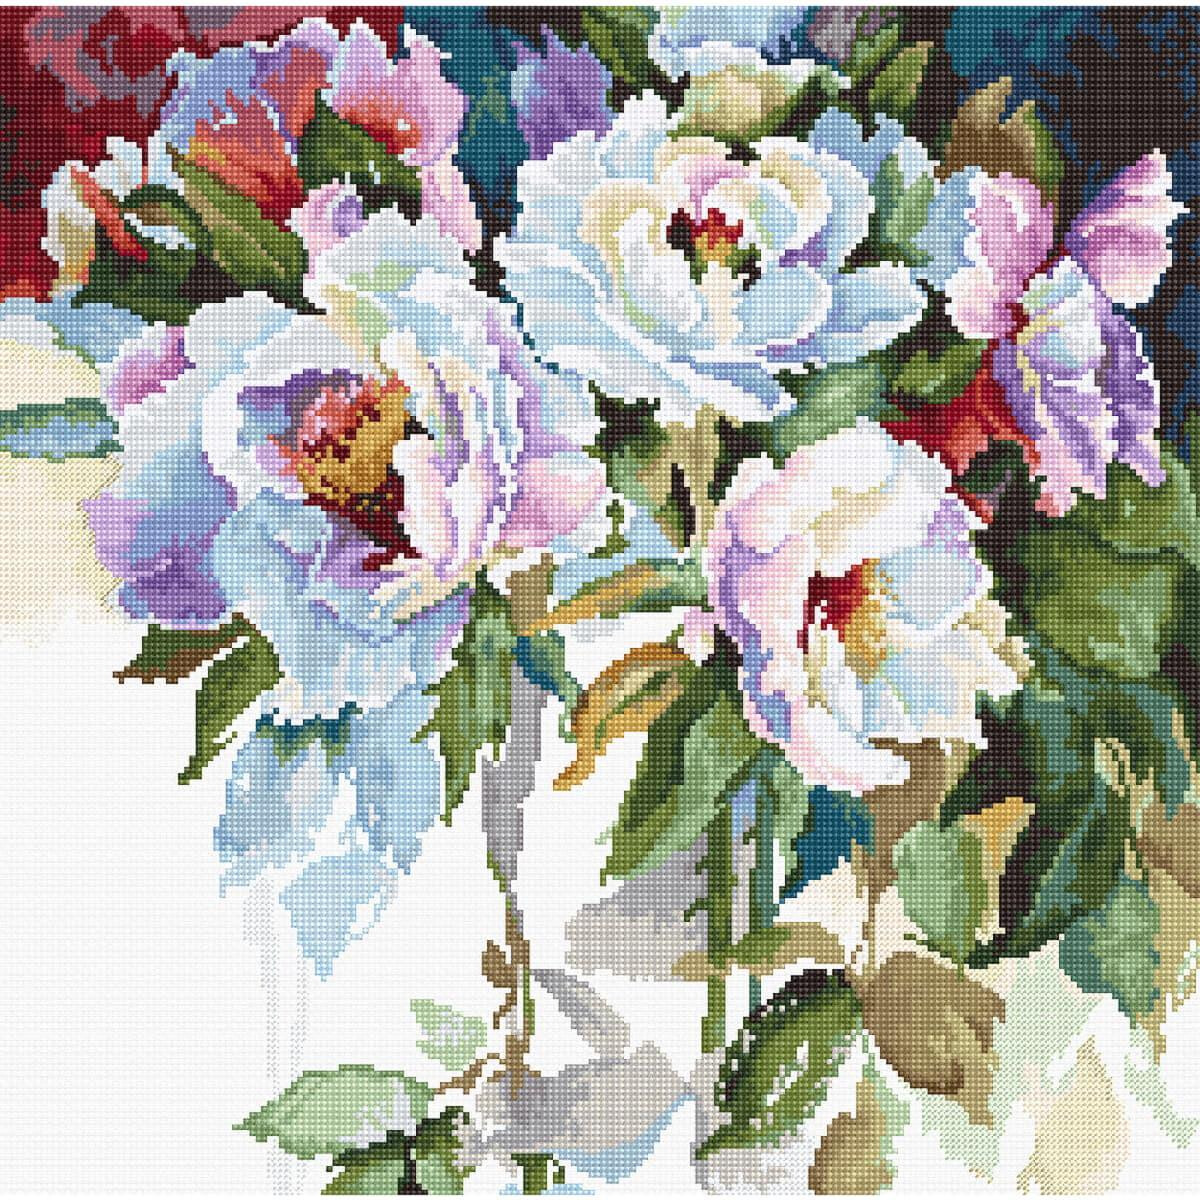 A colorful embroidery packing pattern from Luca-s that...